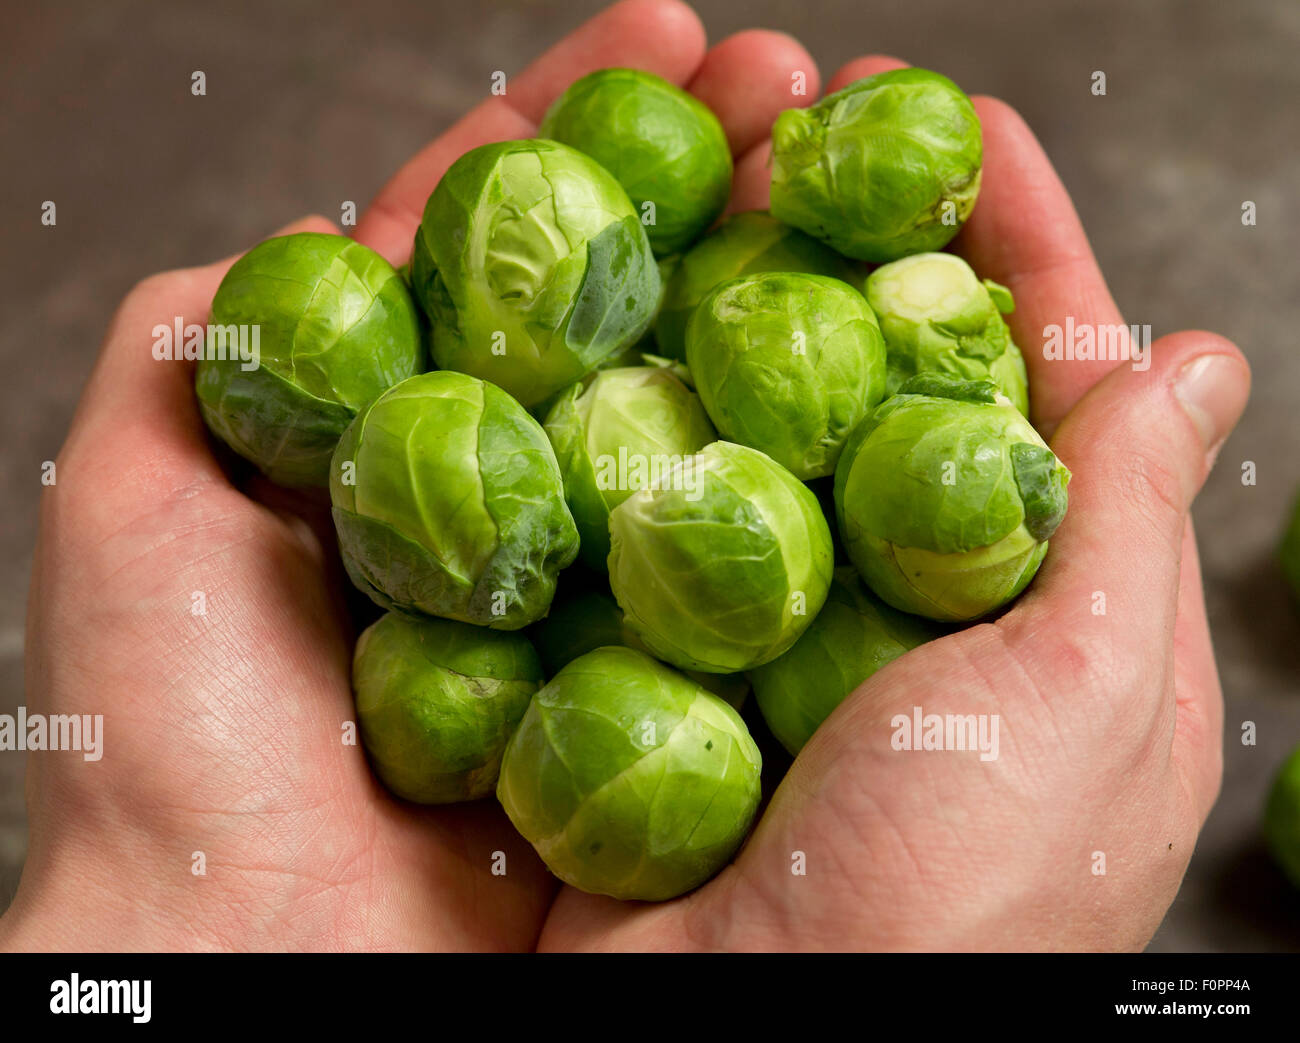 Brussels sprouts a five-a-day green vegetable often part of a Christmas meal. a UK Stock Photo